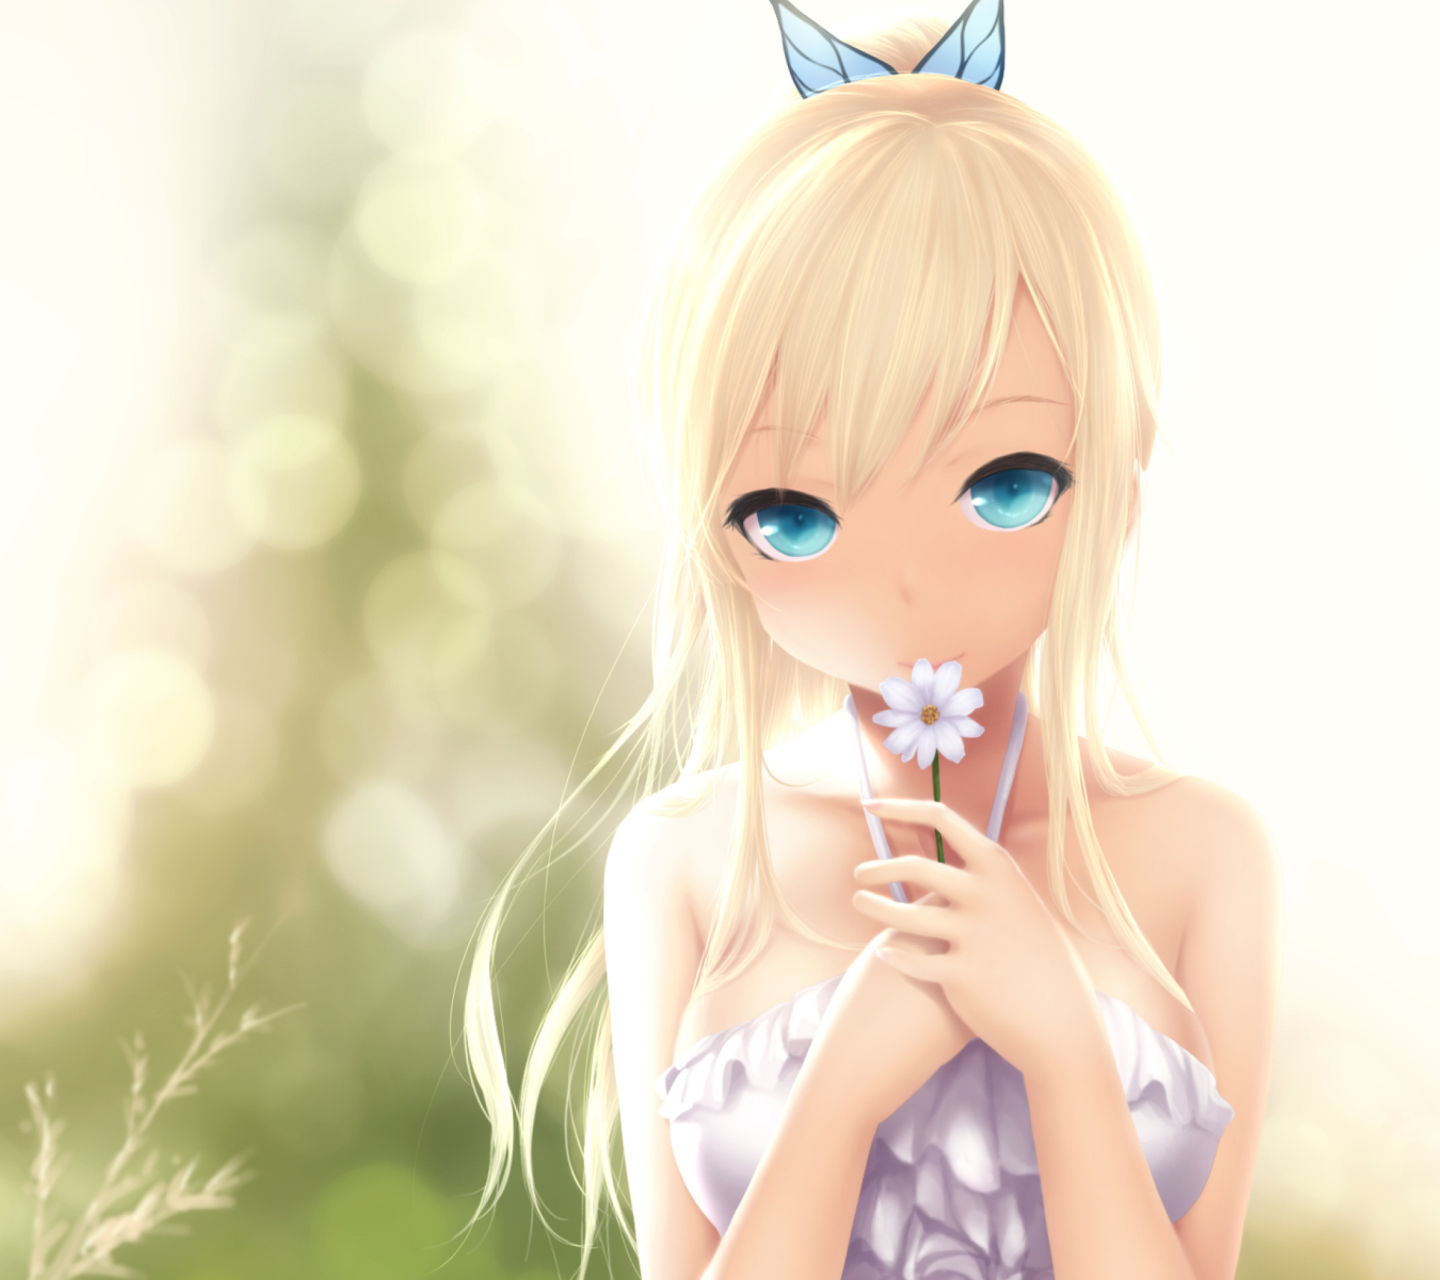 Das Anime Blonde With Daisy Wallpaper 1440x1280